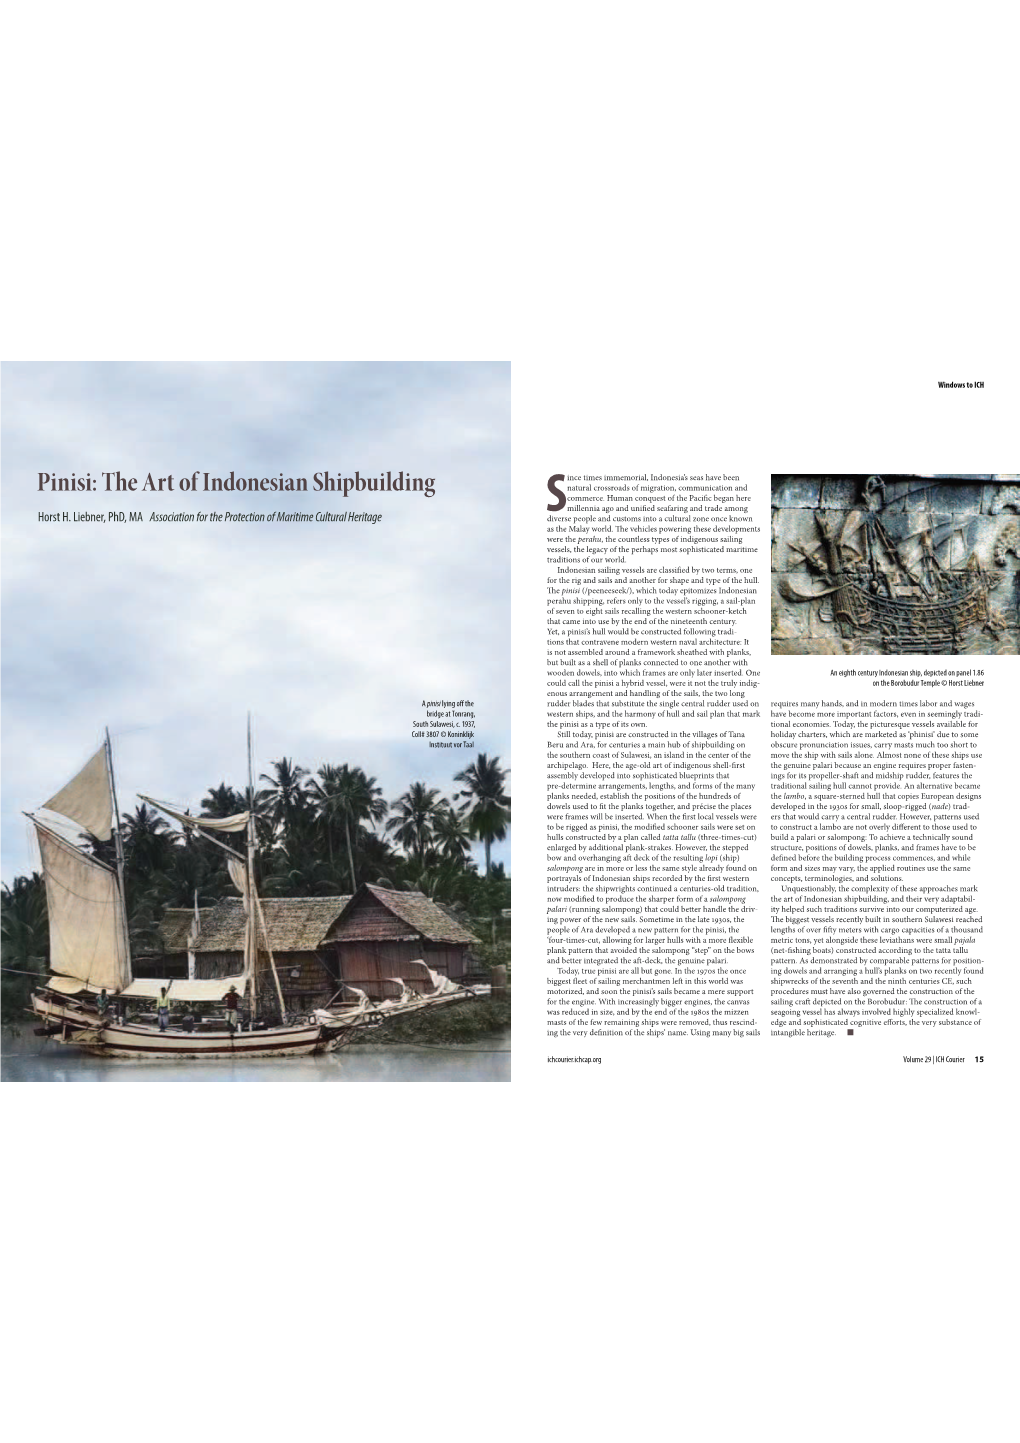 Pinisi: the Art of Indonesian Shipbuilding Natural Crossroads of Migration, Communication and Scommerce